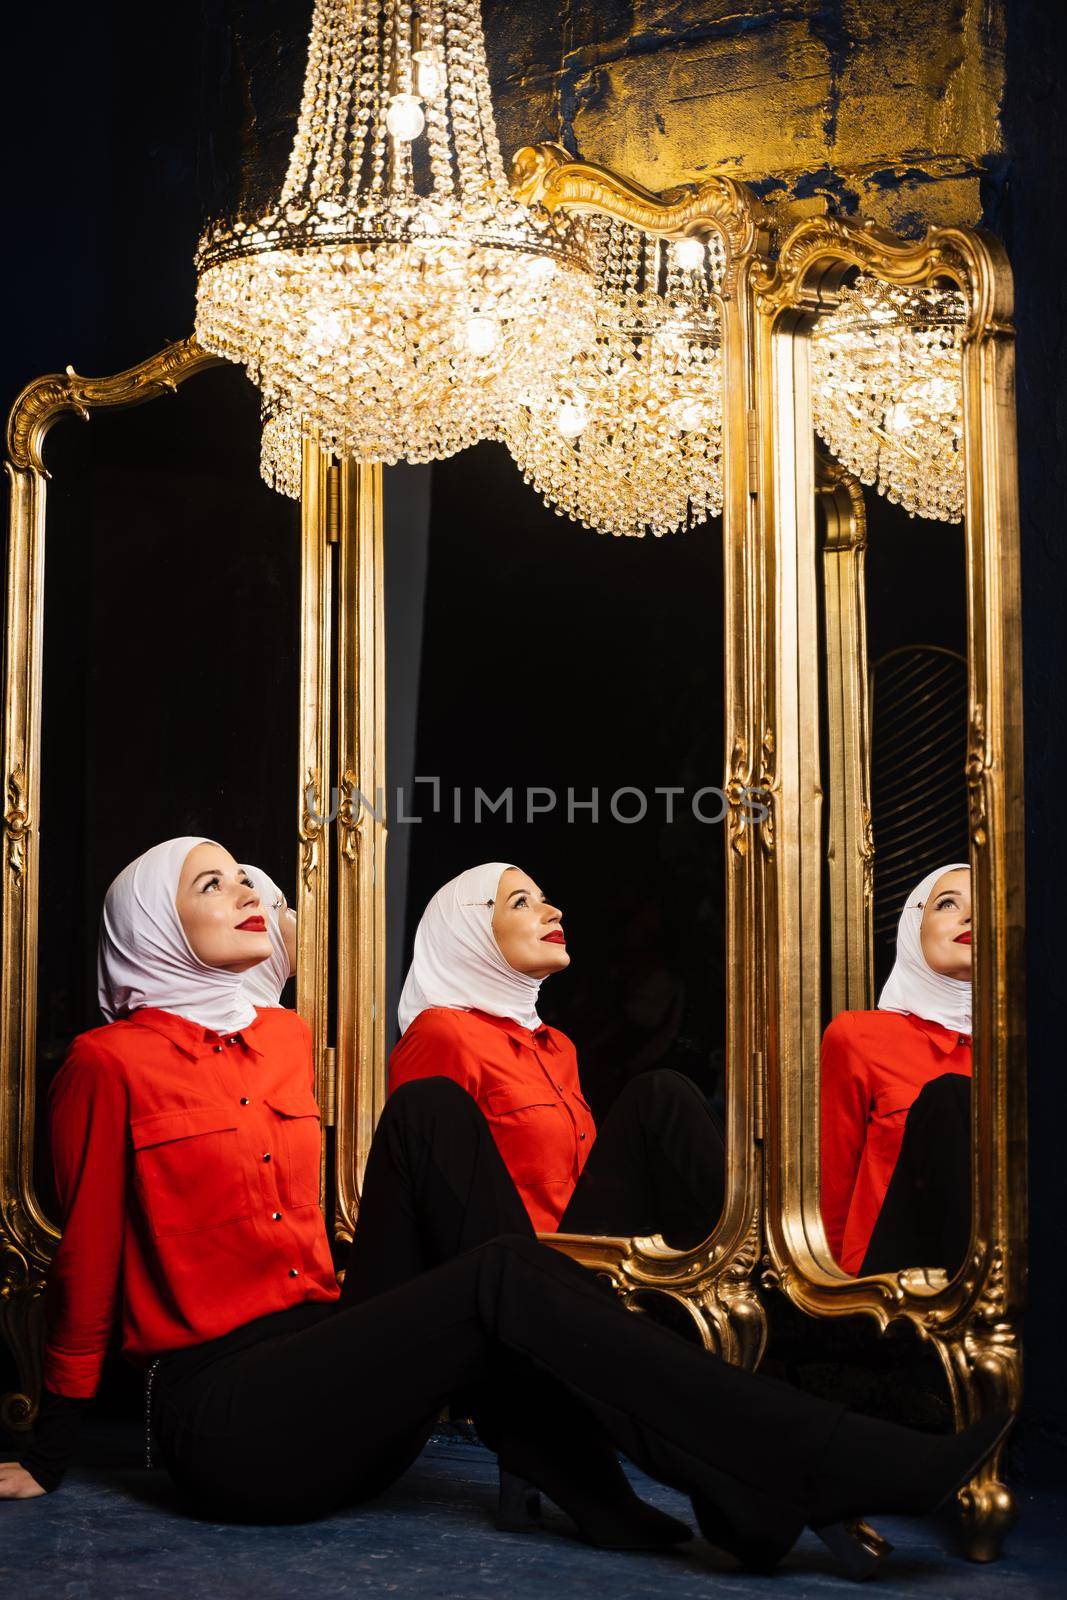 Muslim girl near mirrors with her reflections. Fashion muslim model near big expensive chandelier. Islamic religion